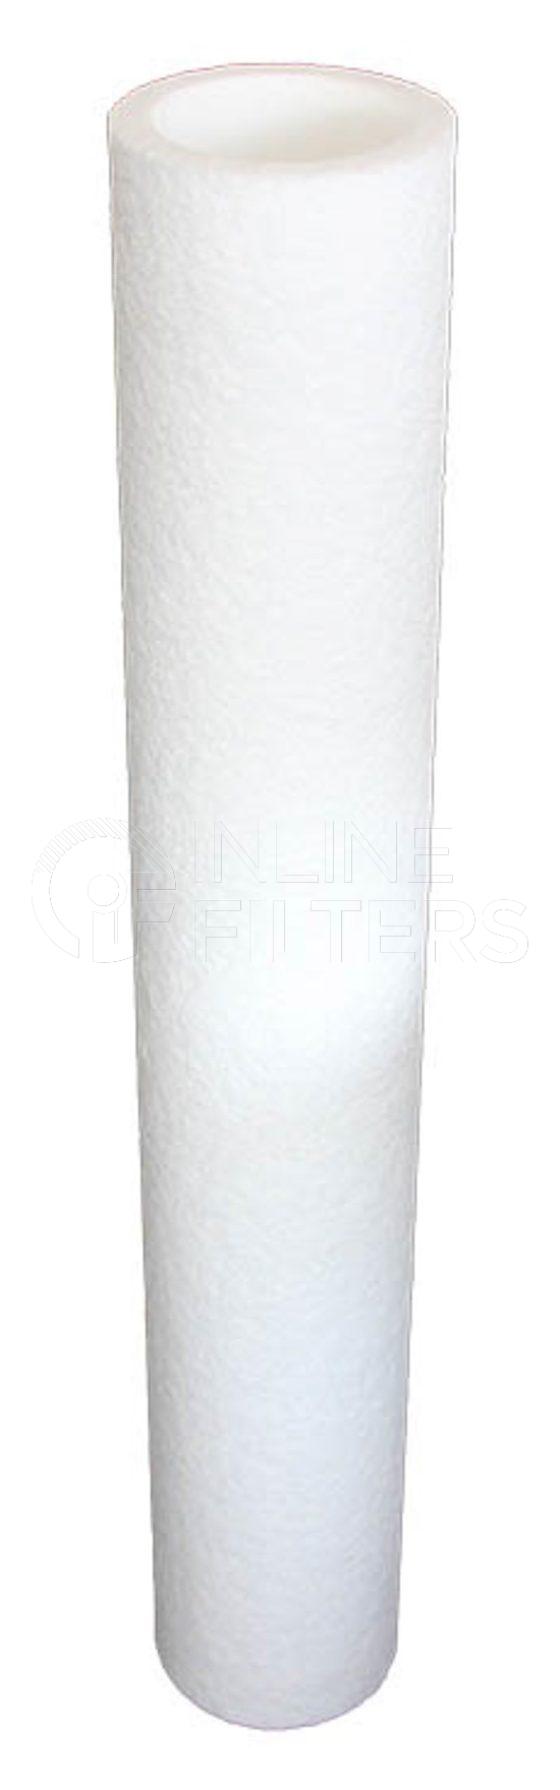 Inline FW90014. Water Filter Product – Cartridge – Round Product Water filter product